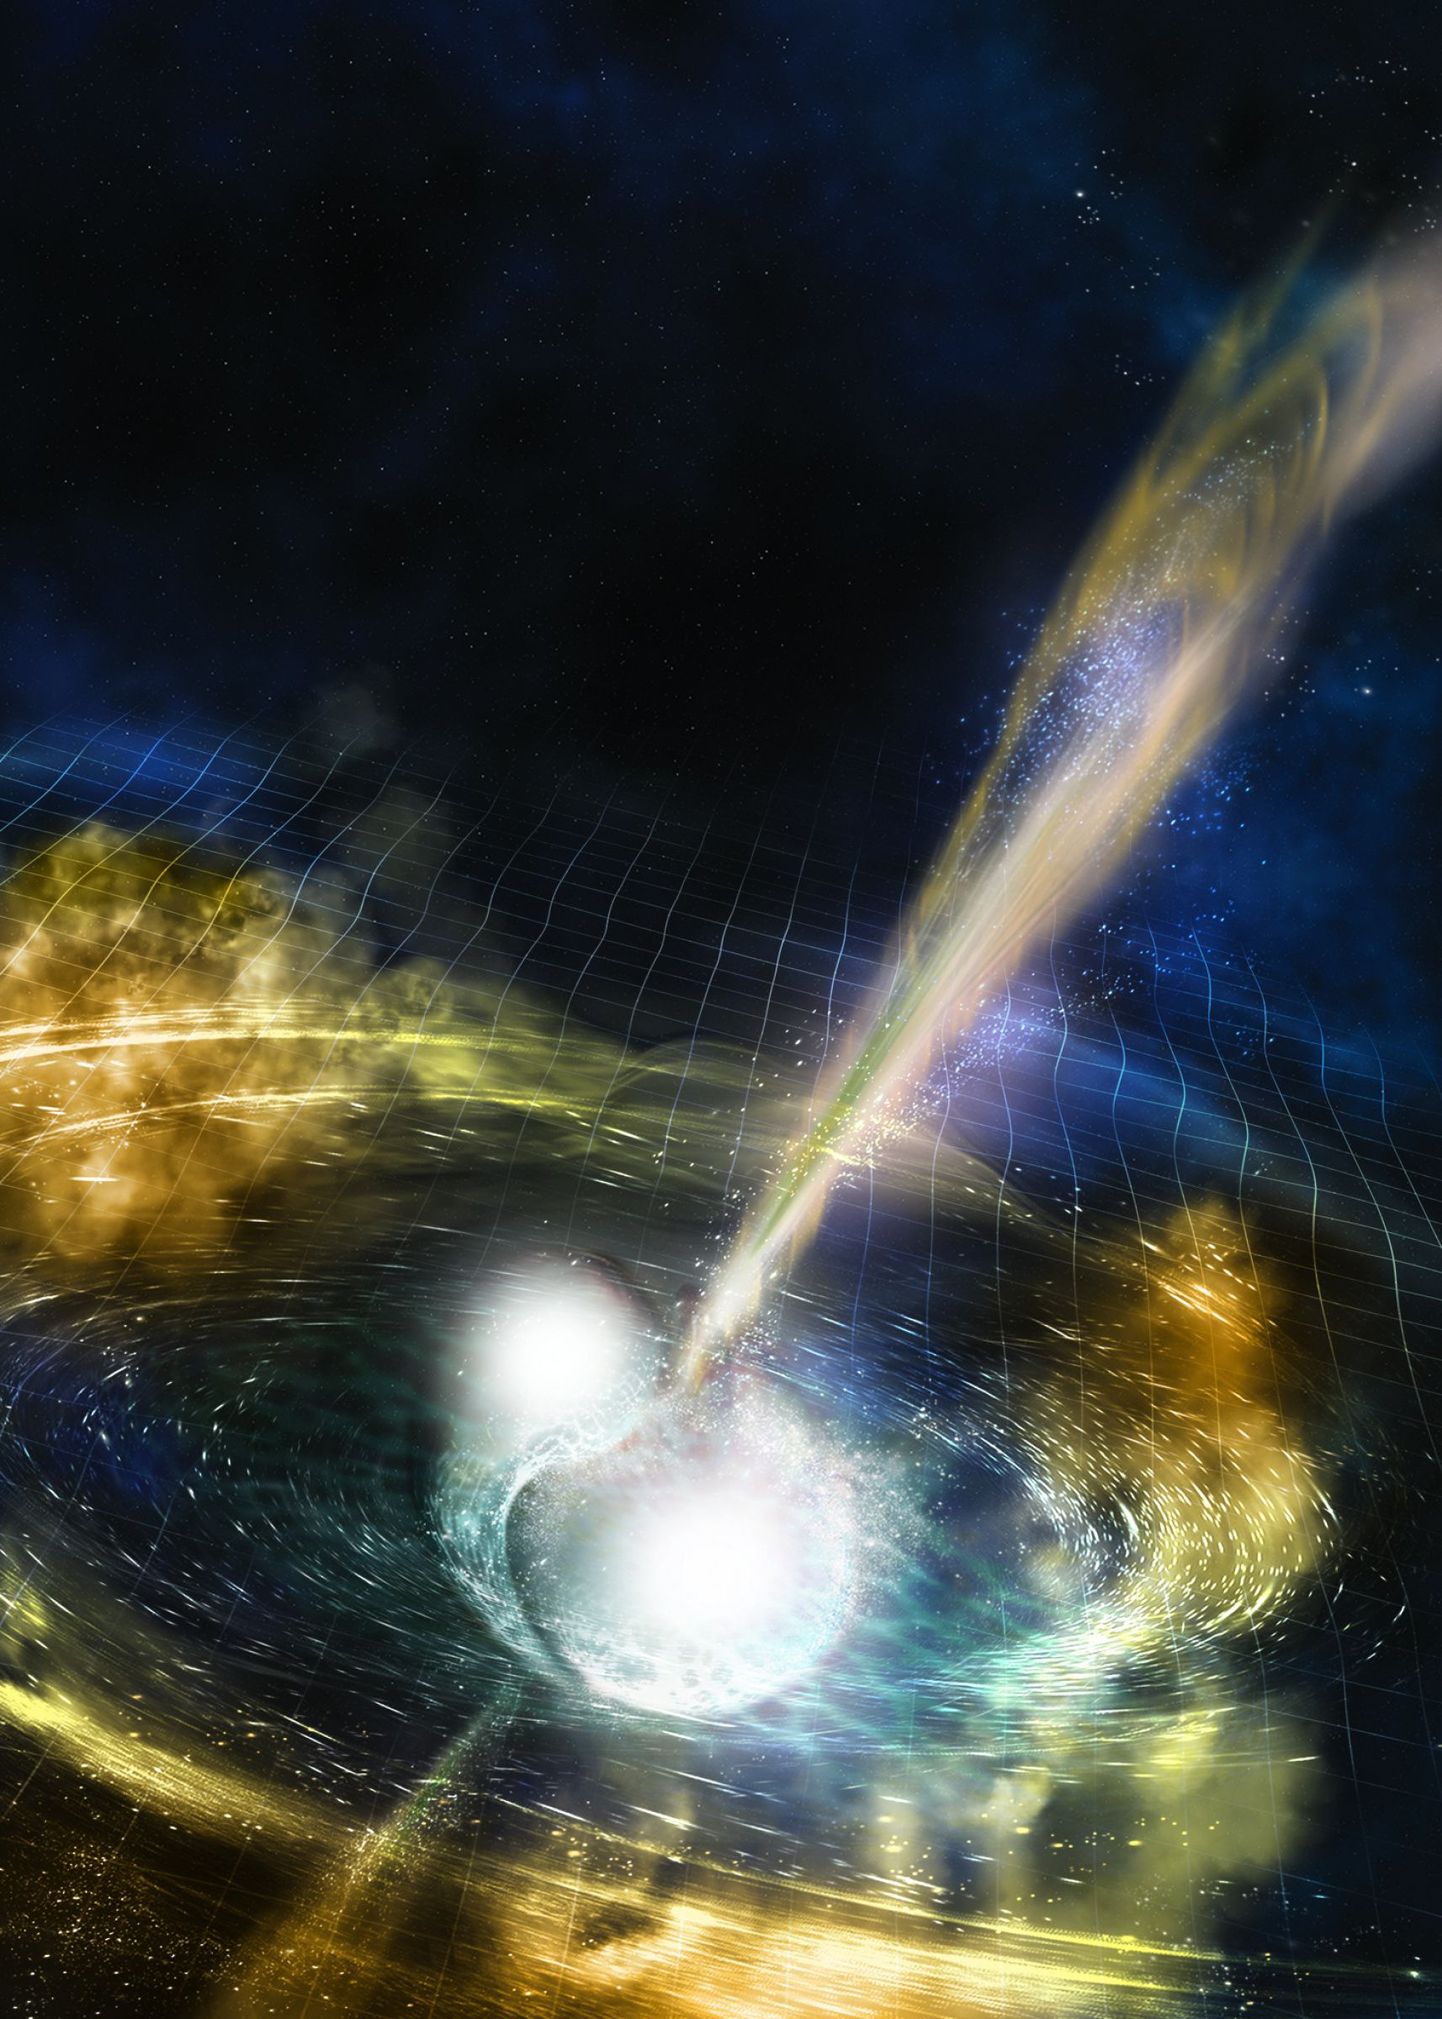 (171022) -- BEIJING, Oct. 22, 2017 (Xinhua) -- Illustration Image shows two merging neutron stars. The narrow beams represent the gamma-ray burst while the rippling spacetime grid indicates the isotropic gravitational waves that characterize the merger. Swirling clouds of material ejected from the merging stars are a possible source of the light that was seen at lower energies. Scientists announced Monday that they have for the first time detected the ripples in space and time known as gravitational waves as well as light from a spectacular collision of two neutron stars. (Xinhua/National Science Foundation/LIGO/Sonoma State University/A. Simonnet.)  (Photo by Xinhua/Sipa USA)